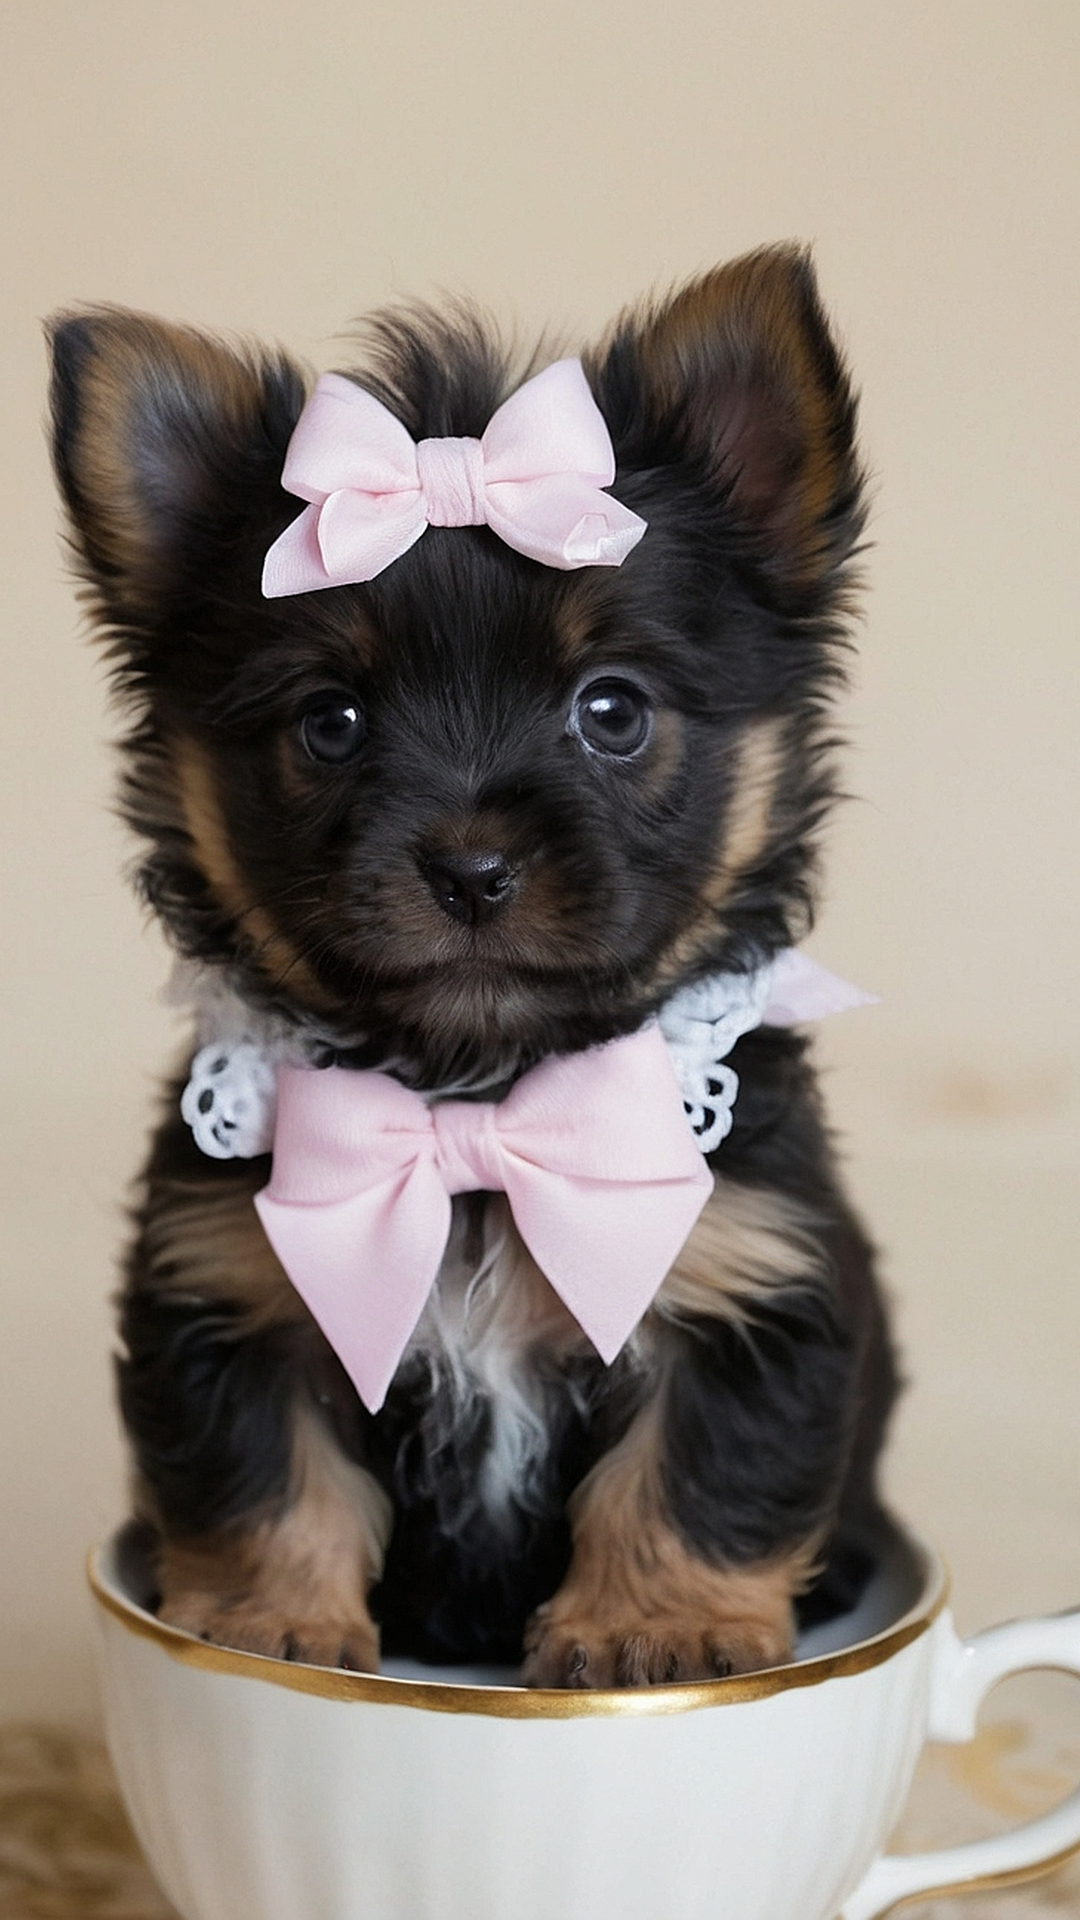 Pint-Sized Cuteness: Teacup Puppies Unleashed